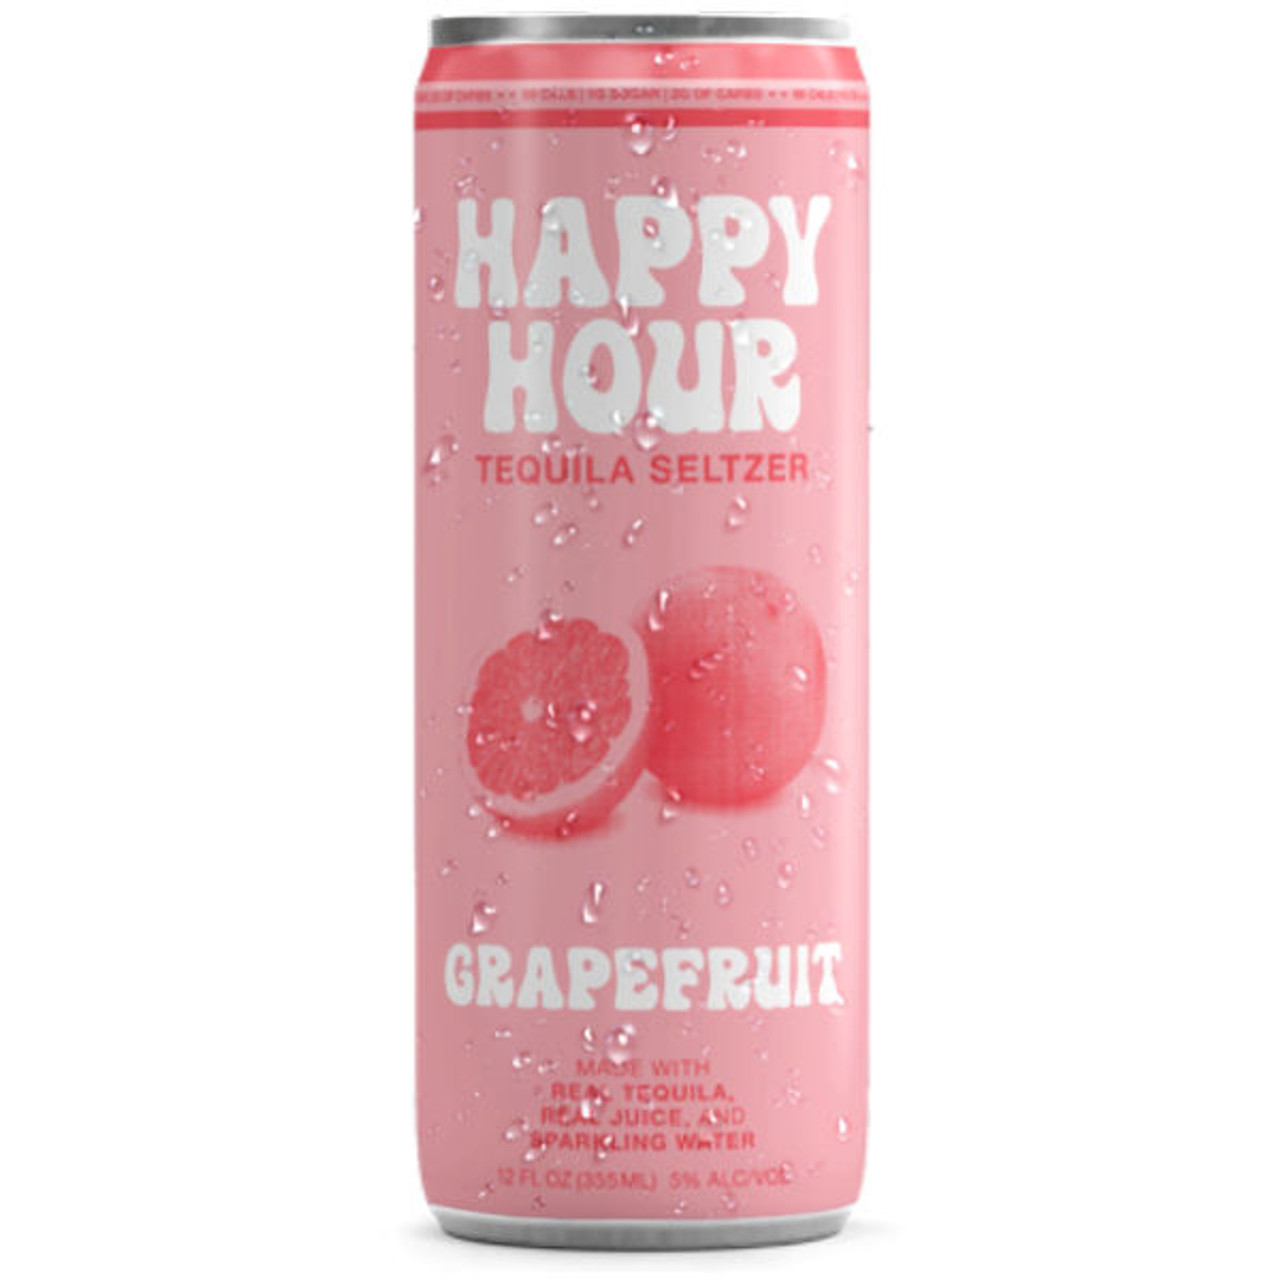 Happy Hour Tequila Sharp Lime Seltzer 4pk 12oz Can 5.0% ABV – BevMo!